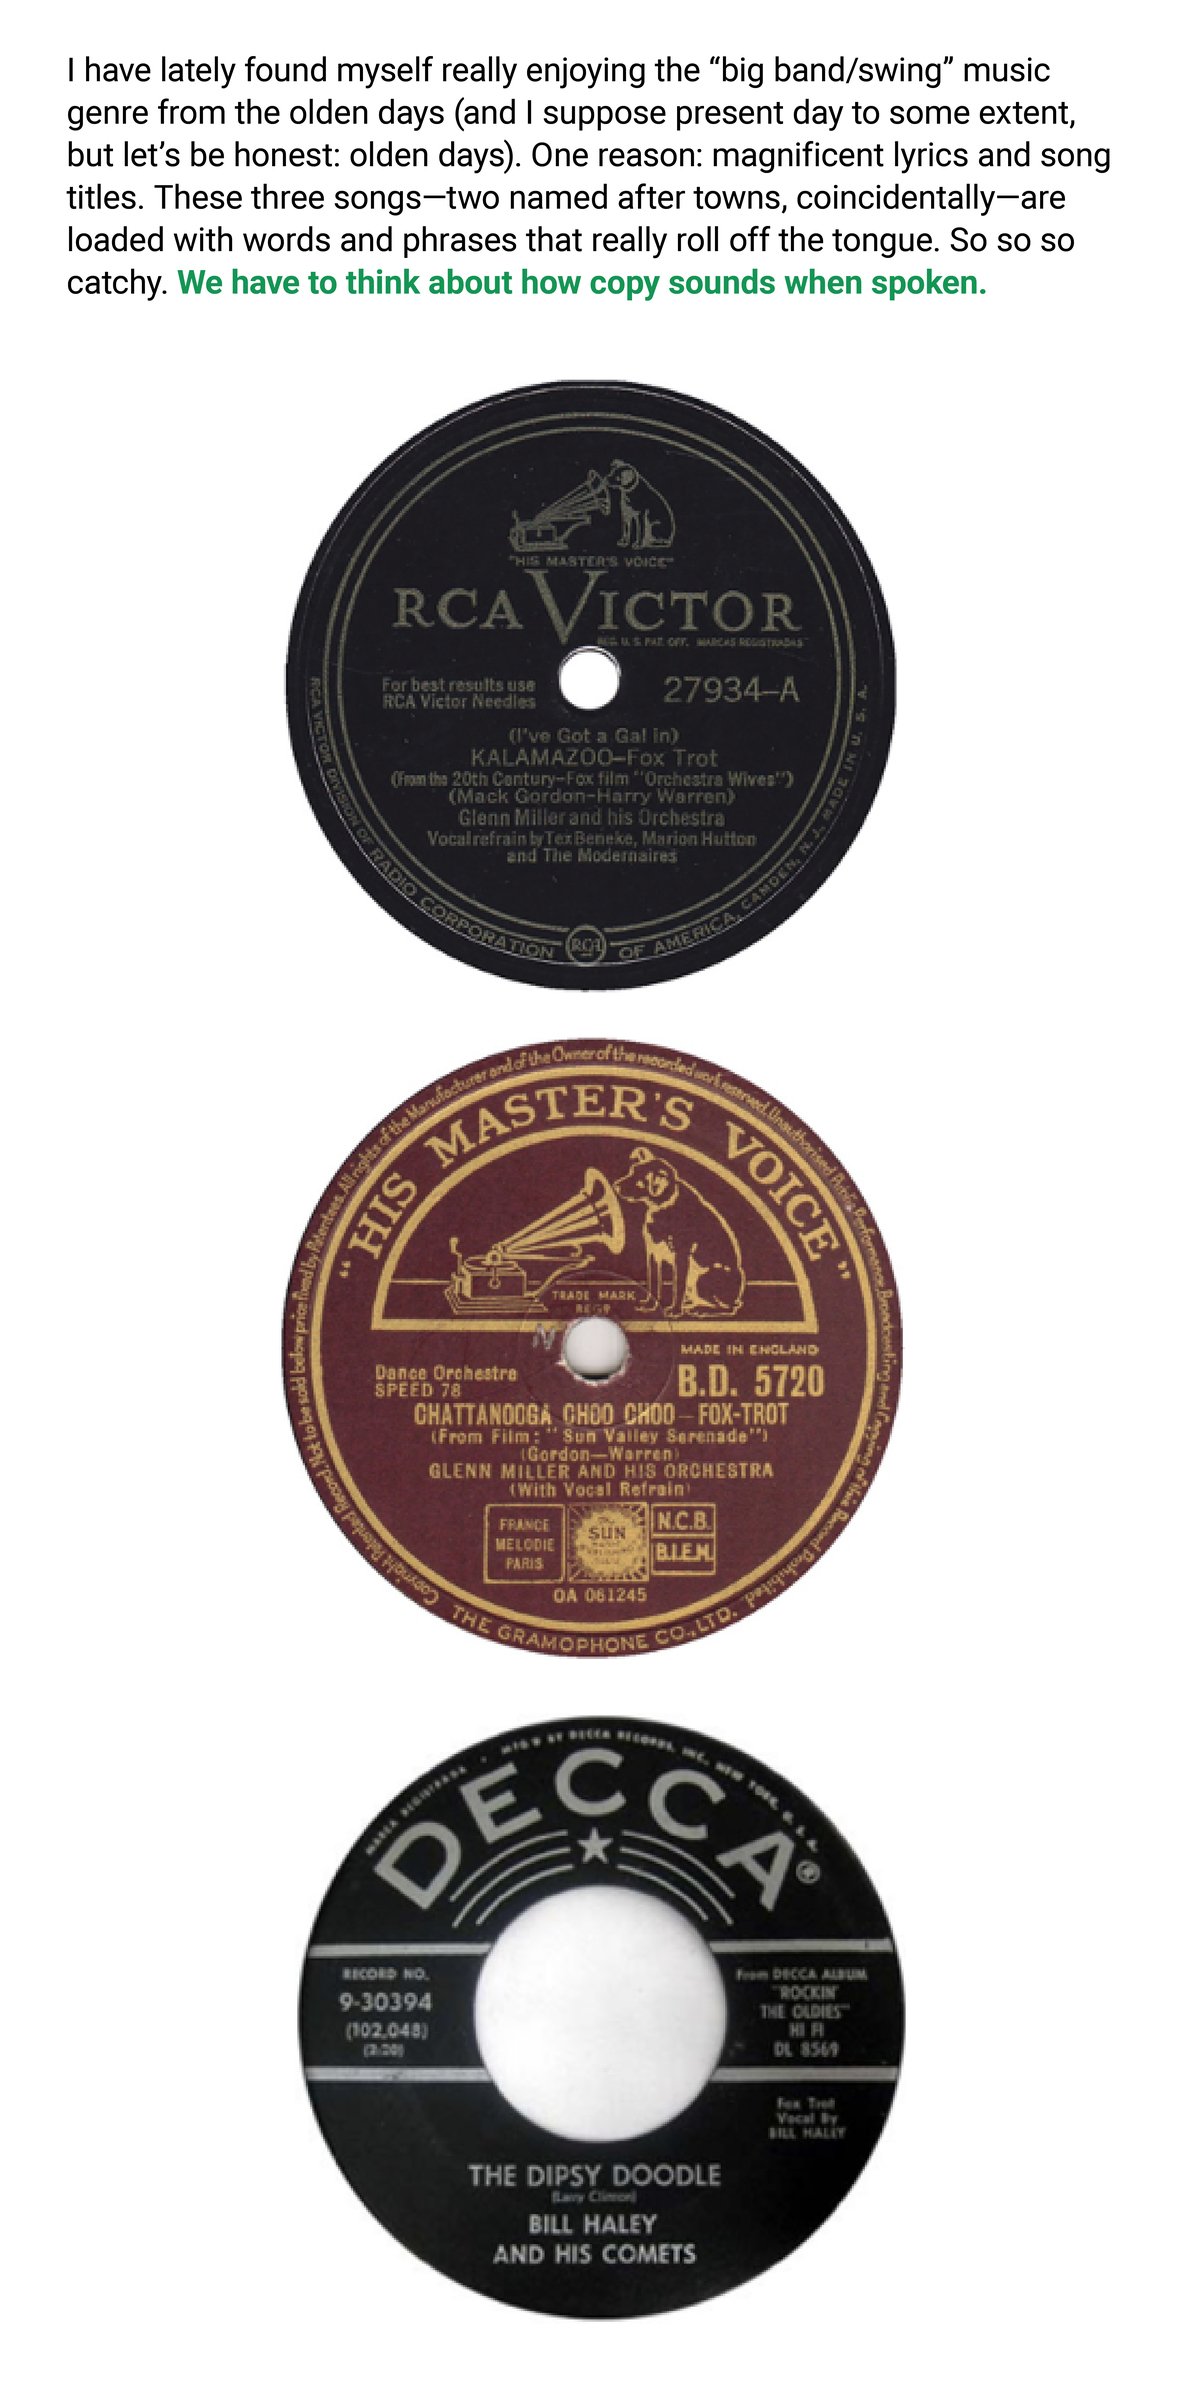 The image is a compilation of three vintage vinyl record labels, each accompanied by text that expresses the uploader's enjoyment of big band and swing music from the past, particularly because of the catchy and well-crafted song titles that "roll off the tongue." The uploader emphasizes the importance of considering how copy sounds when spoken.

The first record label is from RCA Victor featuring the song "I've Got a Gal In) KALAMAZOO" from the film "Orchestra Wives," performed by Glenn Miller and His Orchestra, vocal refrain by Tex Beneke, Marion Hutton, and The Modernaires.

The second label is from His Master's Voice for the song "CHATTANOOGA CHOO CHOO" from the film "Sun Valley Serenade," also by Glenn Miller and His Orchestra with Vocal Refrain.

The third record label is from Decca, showcasing the song "The Dipsy Doodle" by Bill Haley and His Comets.

The record labels reflect the distinctive aesthetic and typography of their era, highlighting the cultural and historical significance of the music and the era it represents.